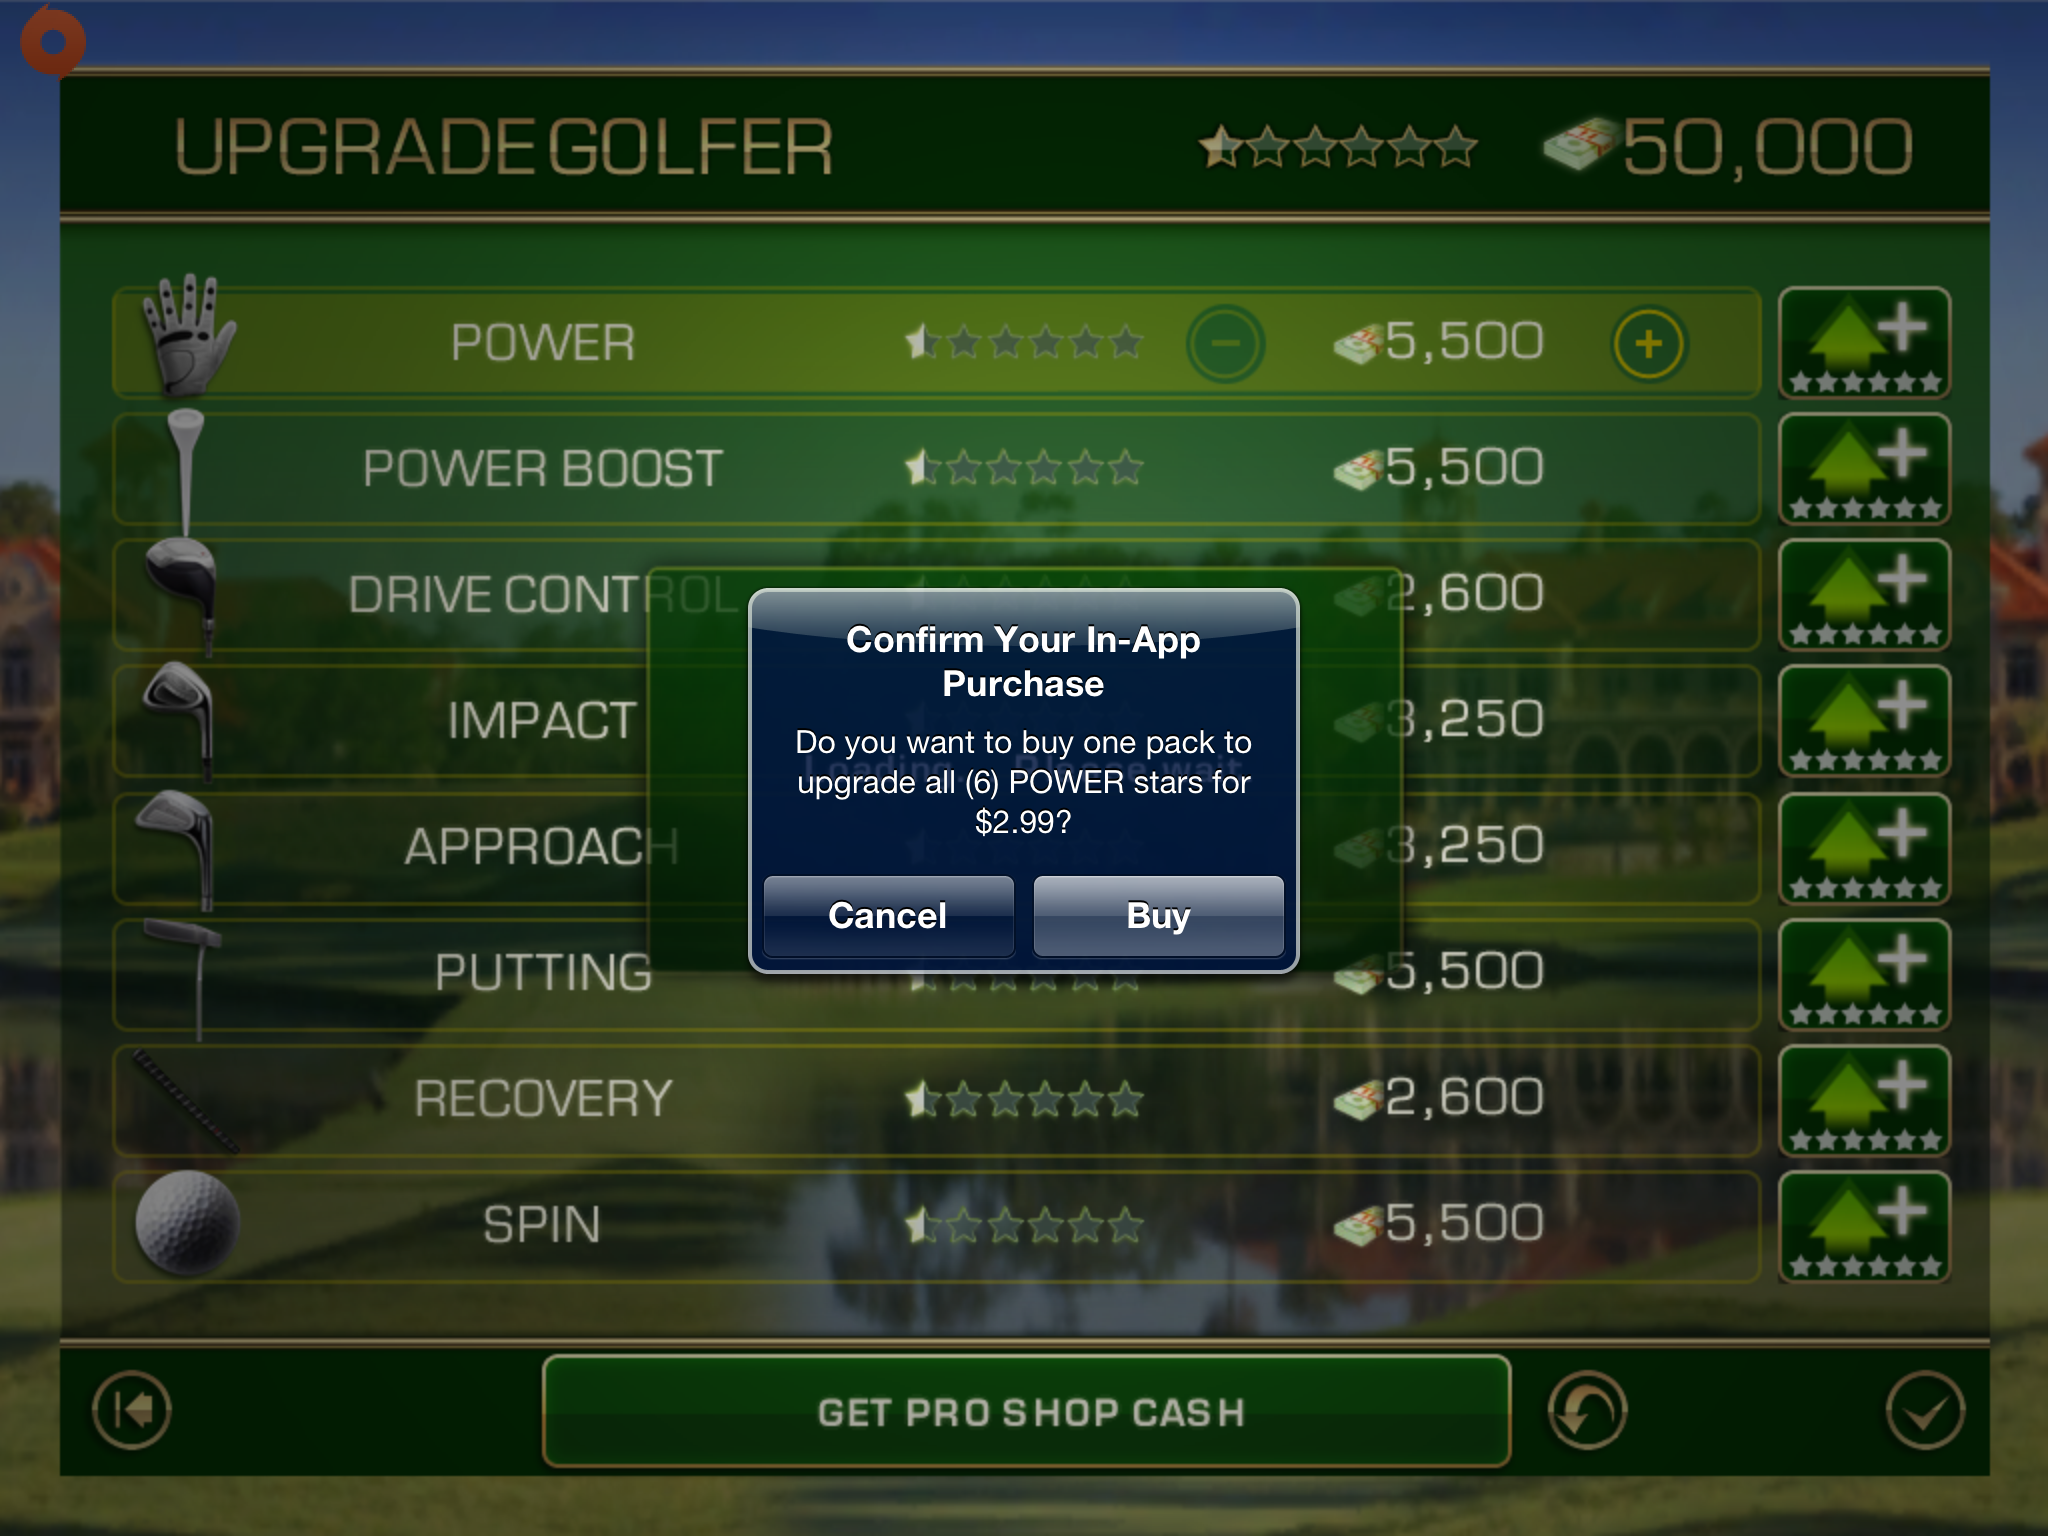 In-app purchase warning screen in Tiger Woods PGA Tour 12 for iOS